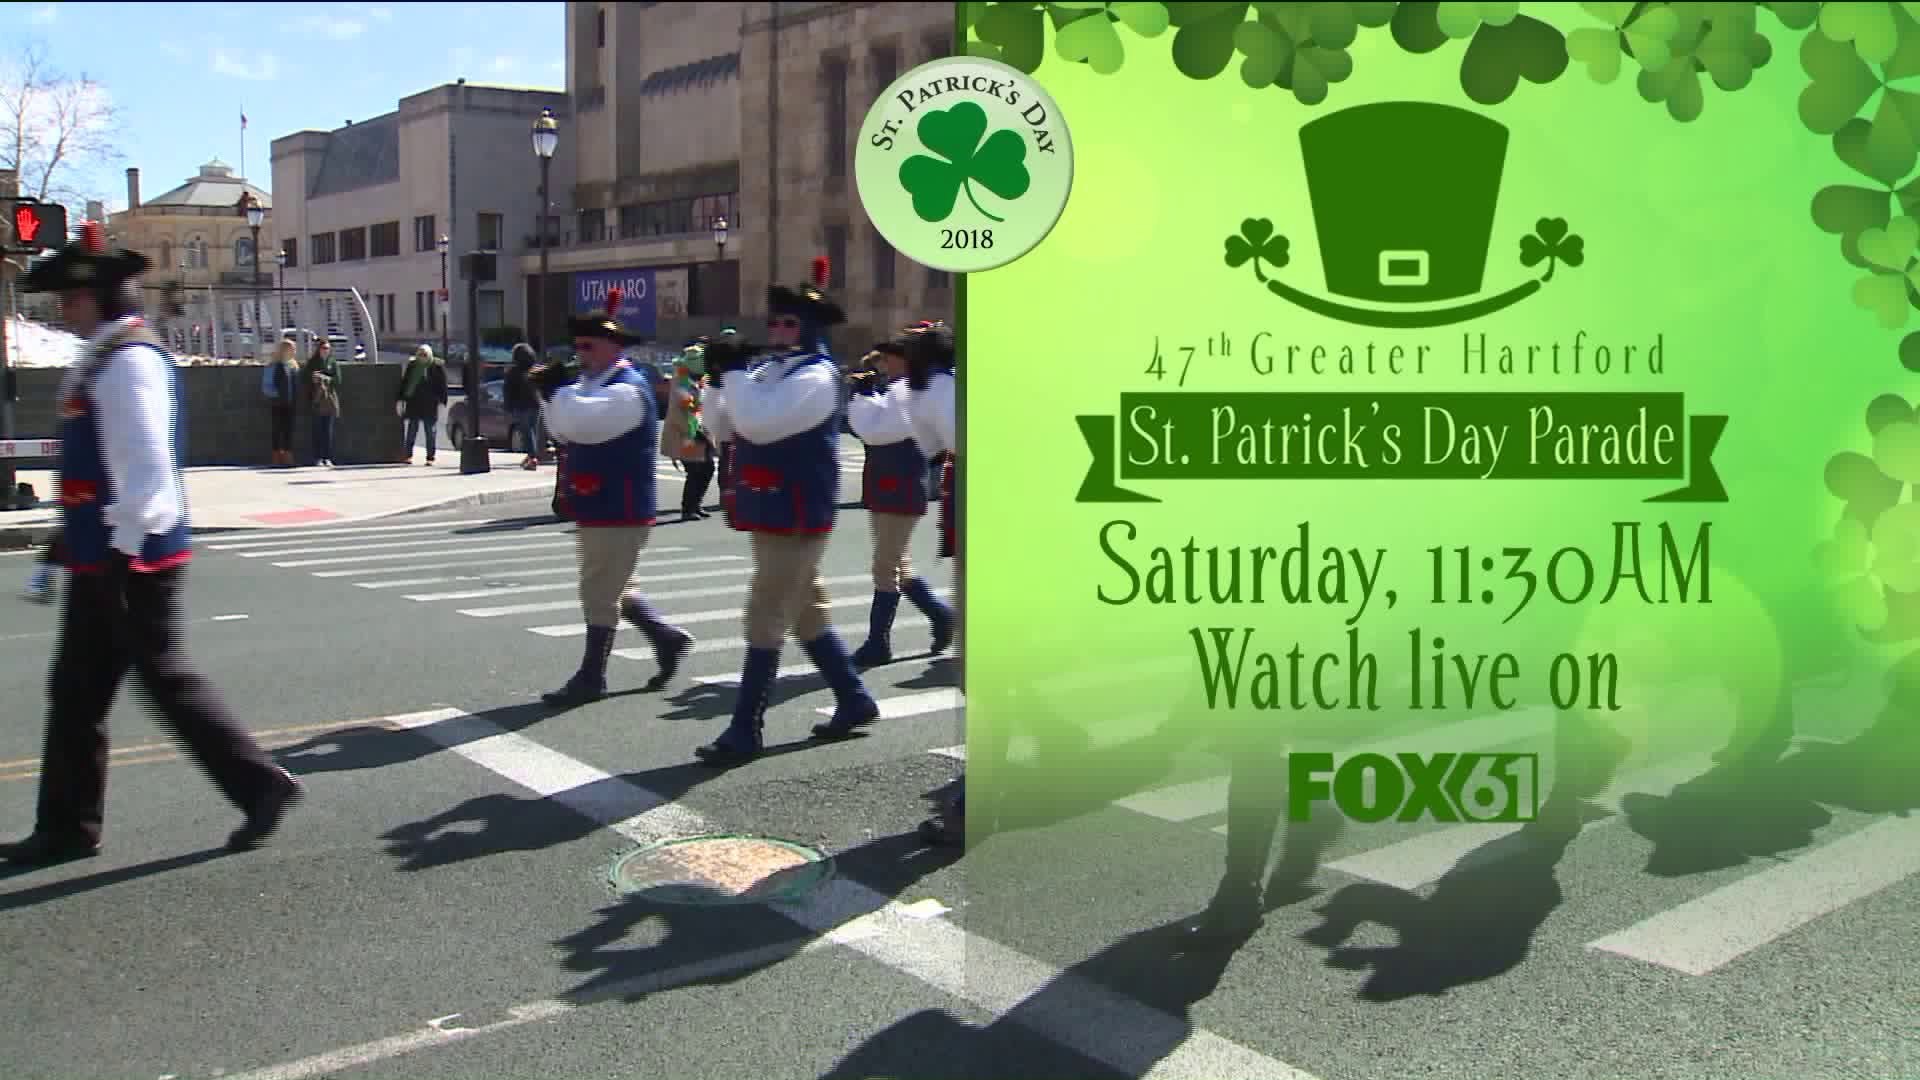 Previewing the 47th Greater Hartford St. Patrick’s Day Parade